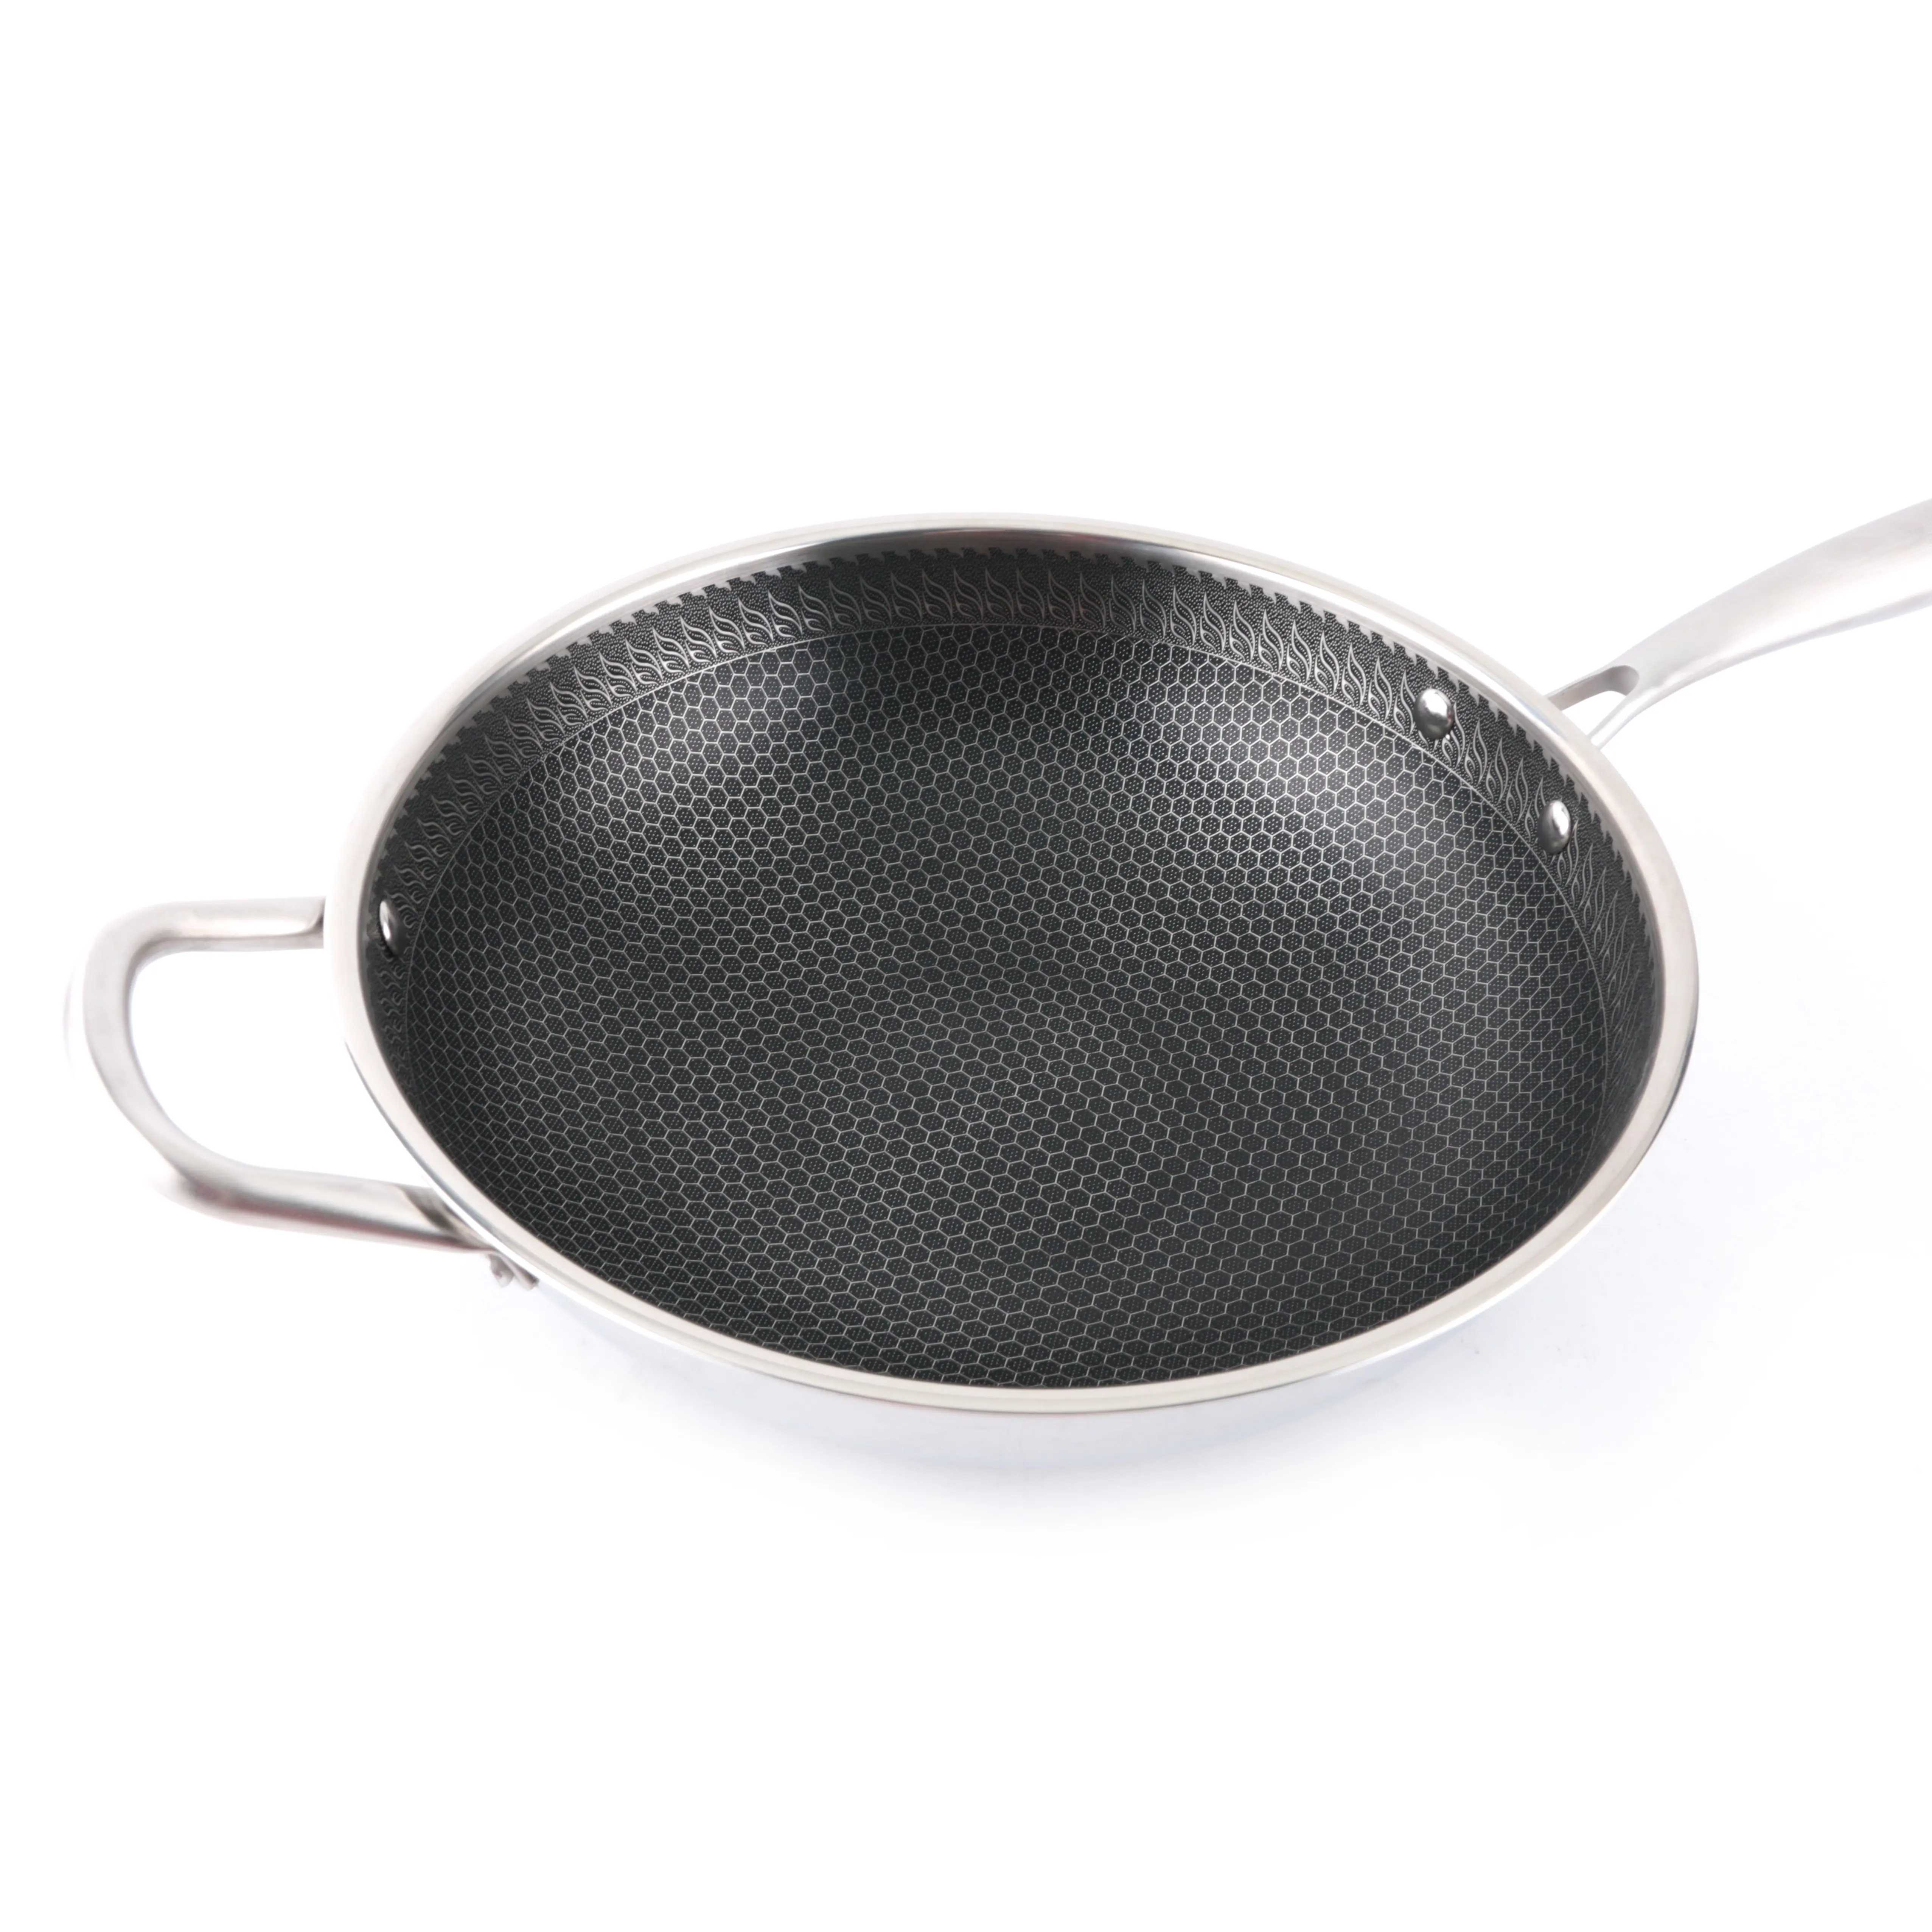 Yuantai Advanced Luxury OEM/ODM 304 Stainless Steel Composite Steel Wok With Glass Cover And Steel Ball